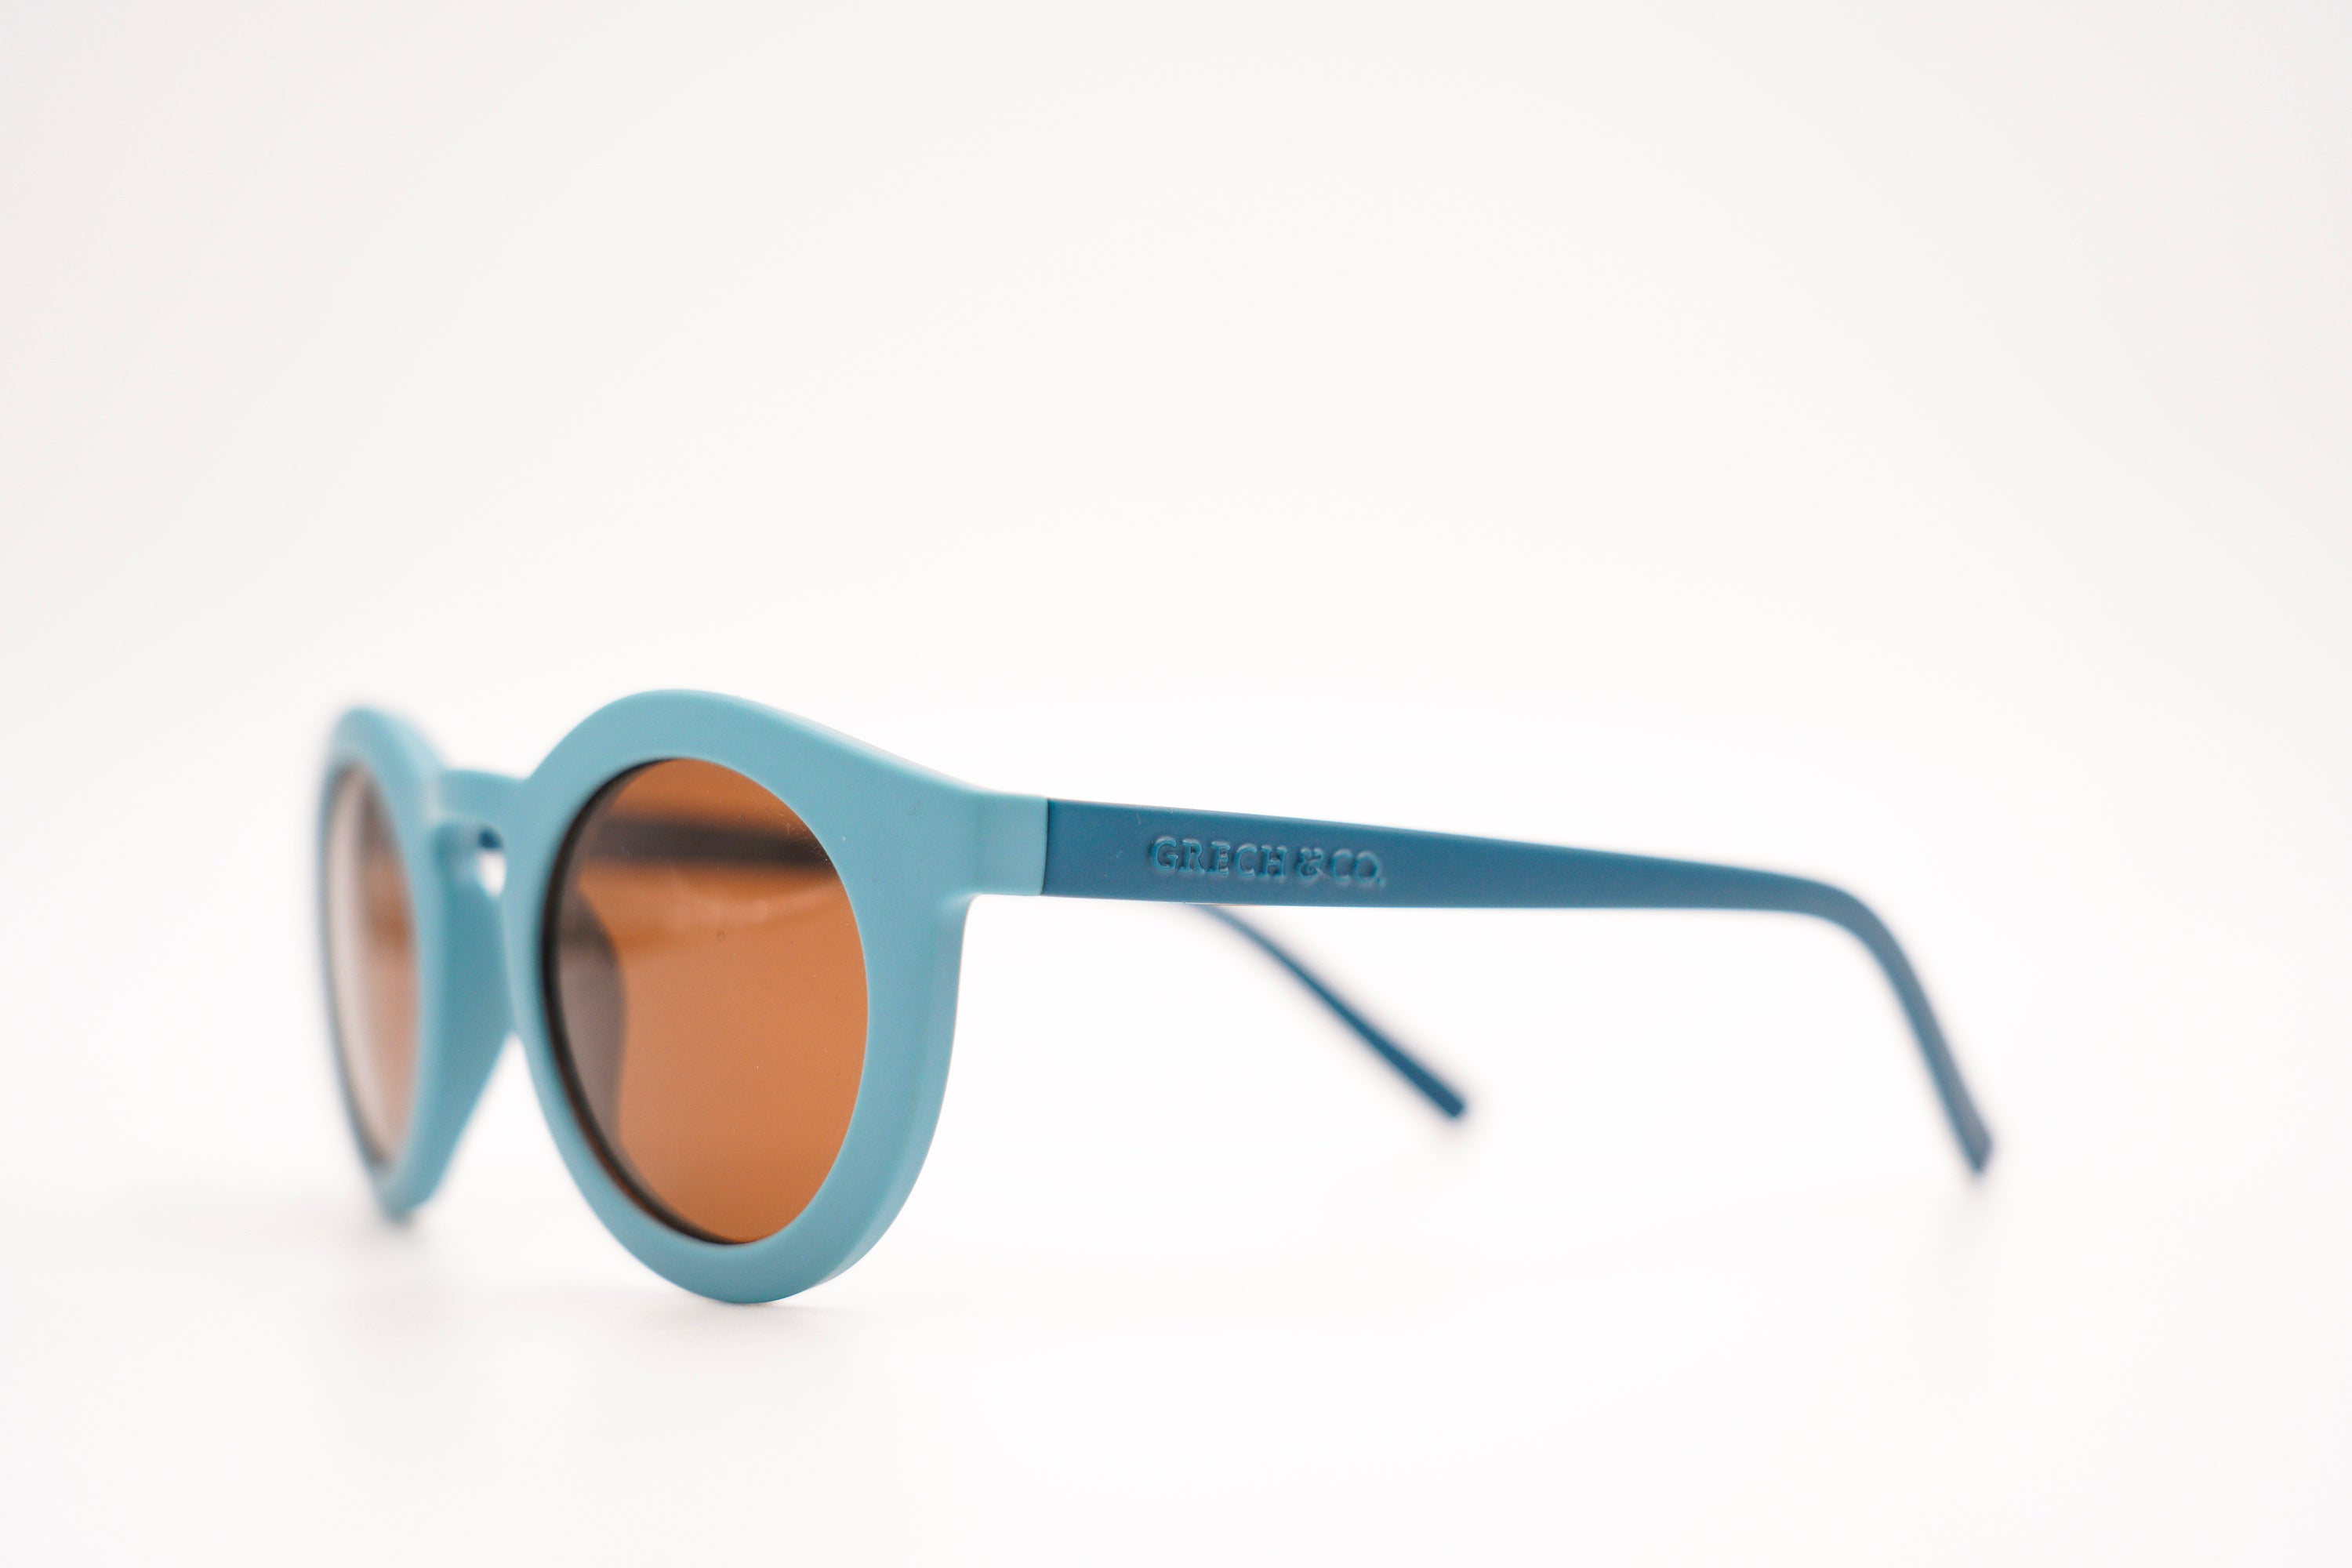 The new sustainable sunglasses in blu colour by Grech & Co is featured in an eco-friendly/non-toxic break-resistant material. Sustainable sunnies are the conscious choice for baby/toddler sunglasses with polarised lenses and UV400 protection from the sun. Mini Me matching sunglasses for babies and parents by MiliMilu.